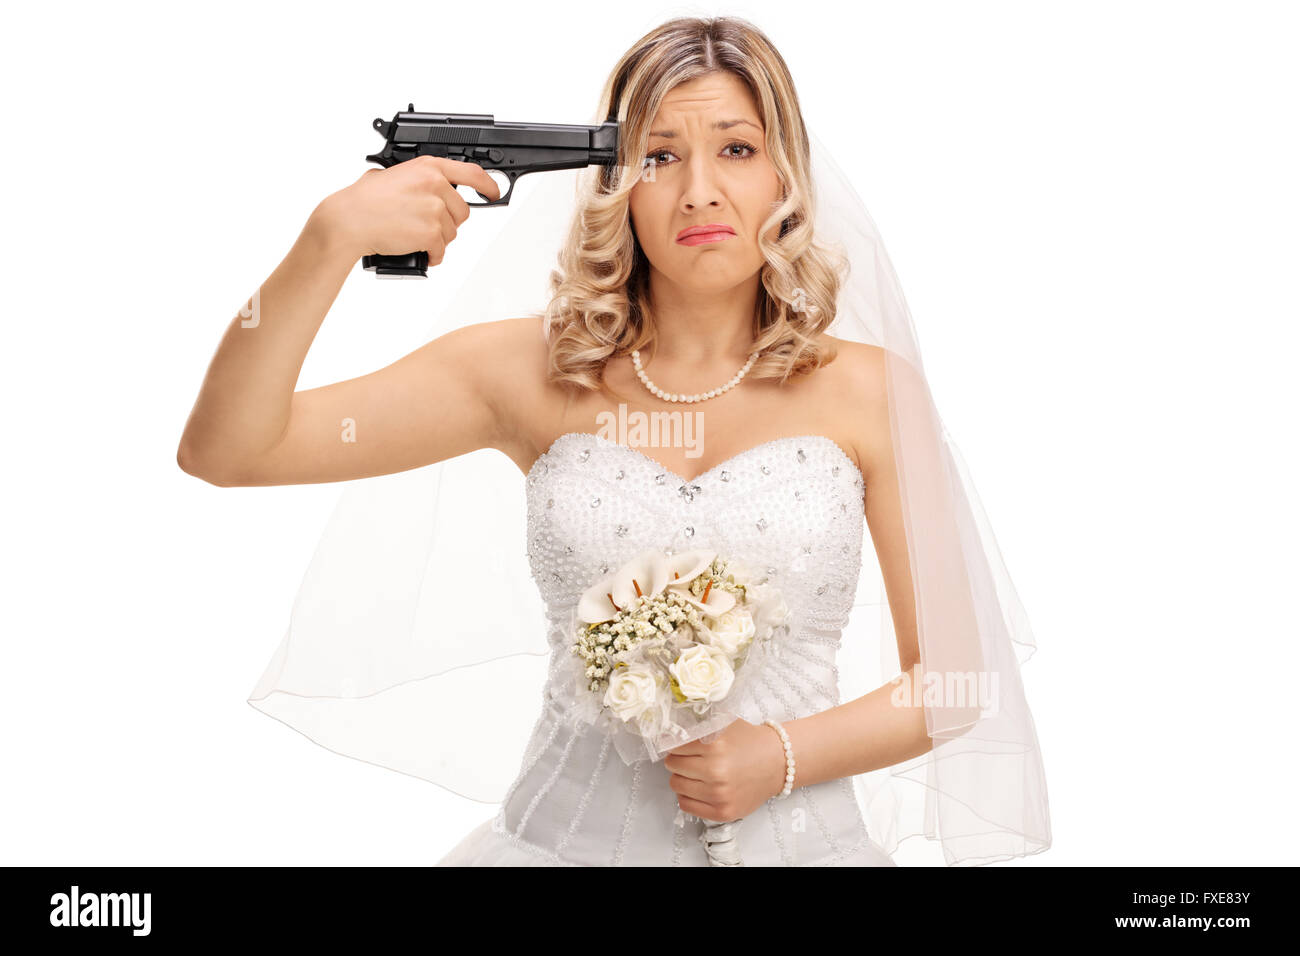 Young desperate bride holding a gun against her head and looking at the camera isolated on white background Stock Photo